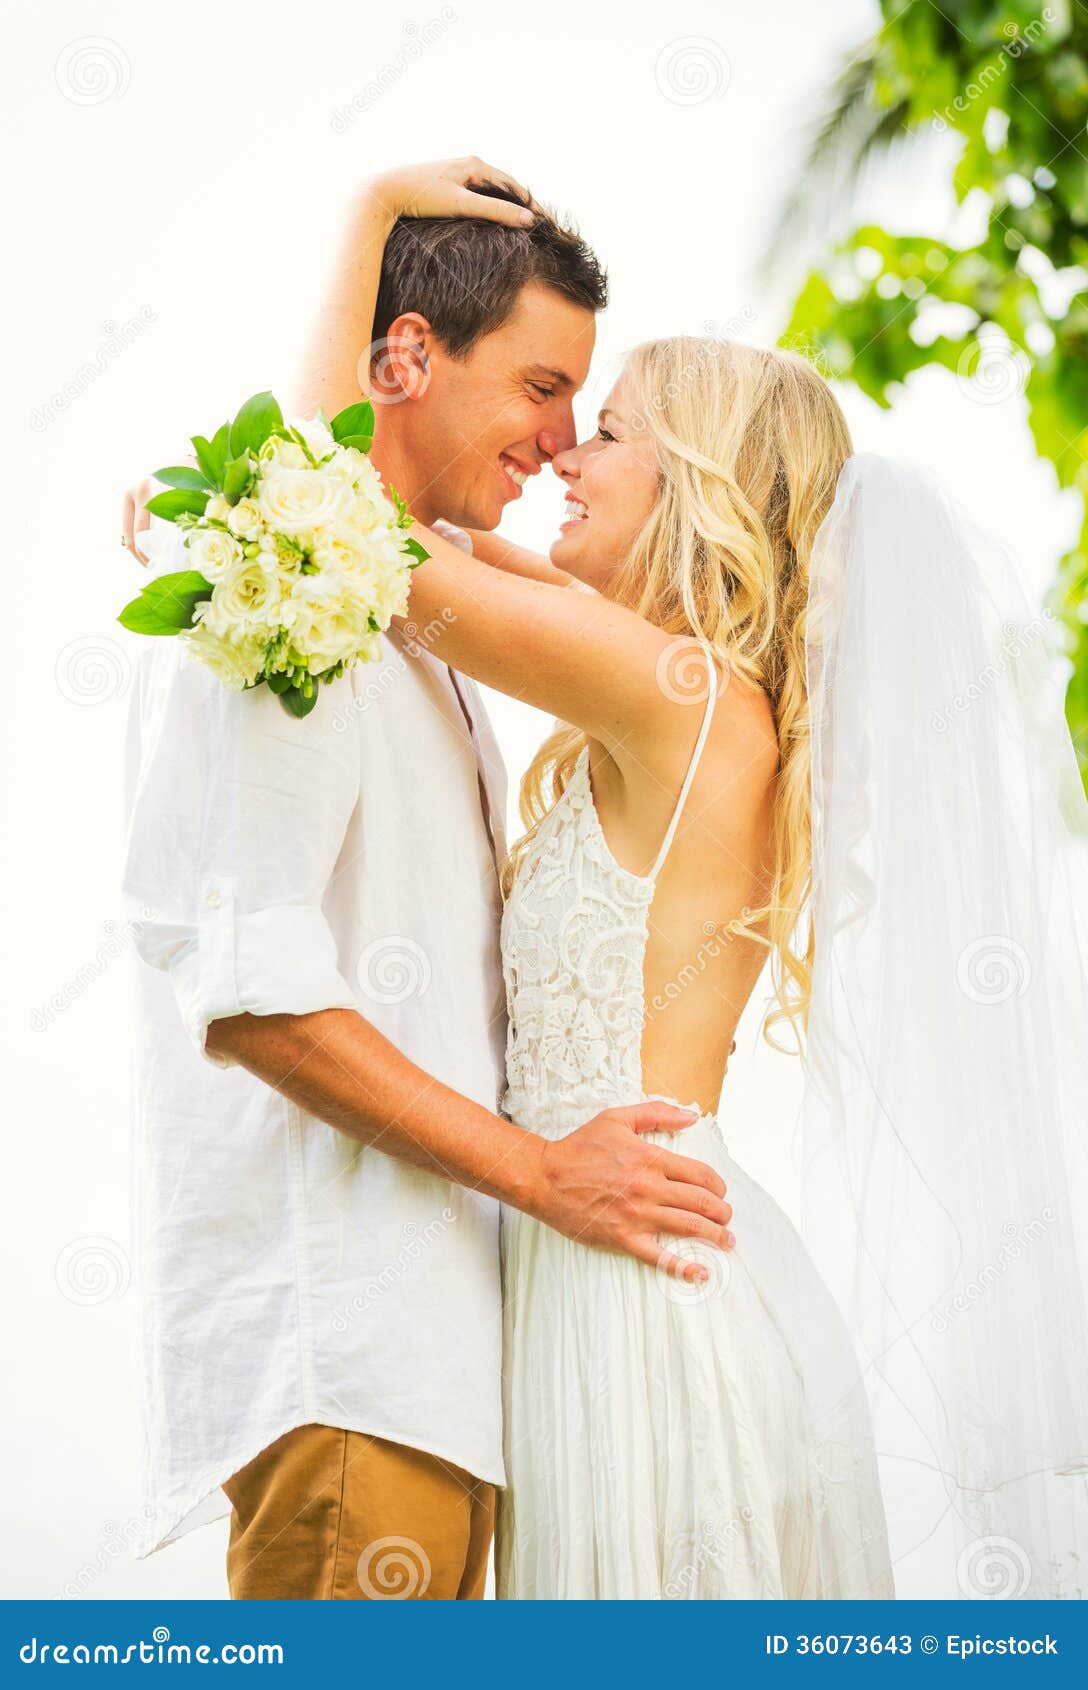 Bride And Groom Romantic Newly Married Couple Embracing